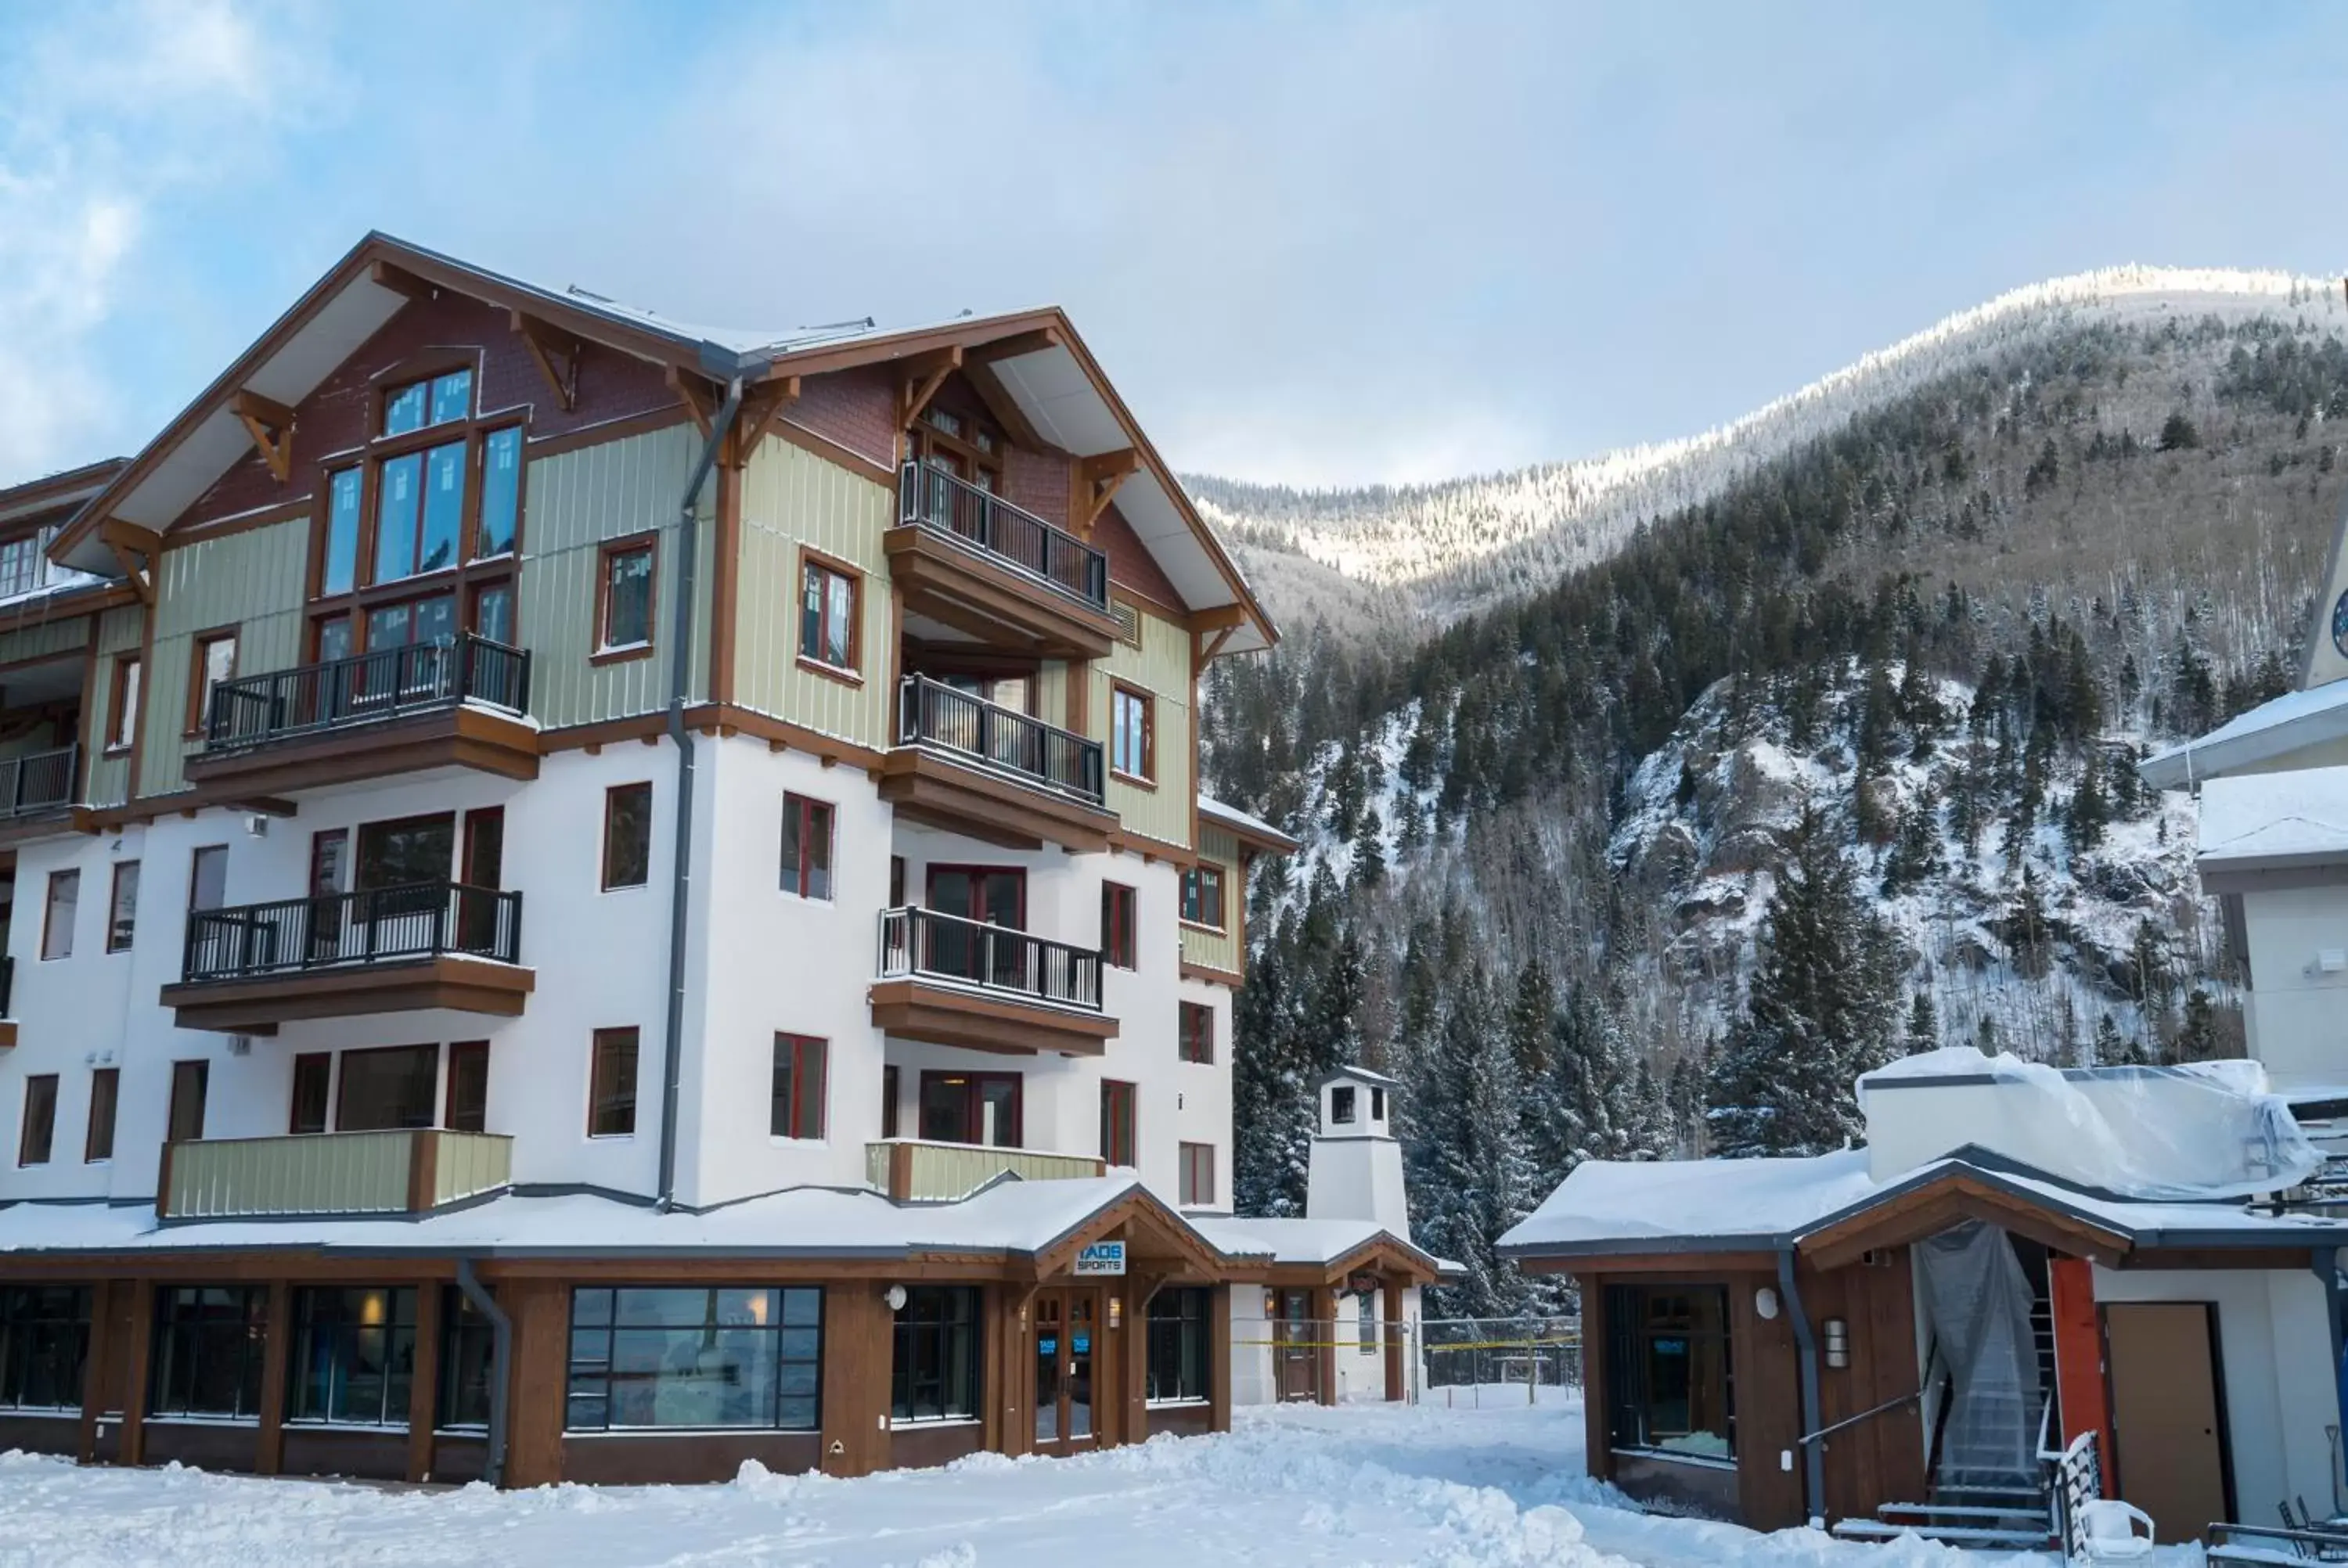 Property building, Winter in The Blake at Taos Ski Valley